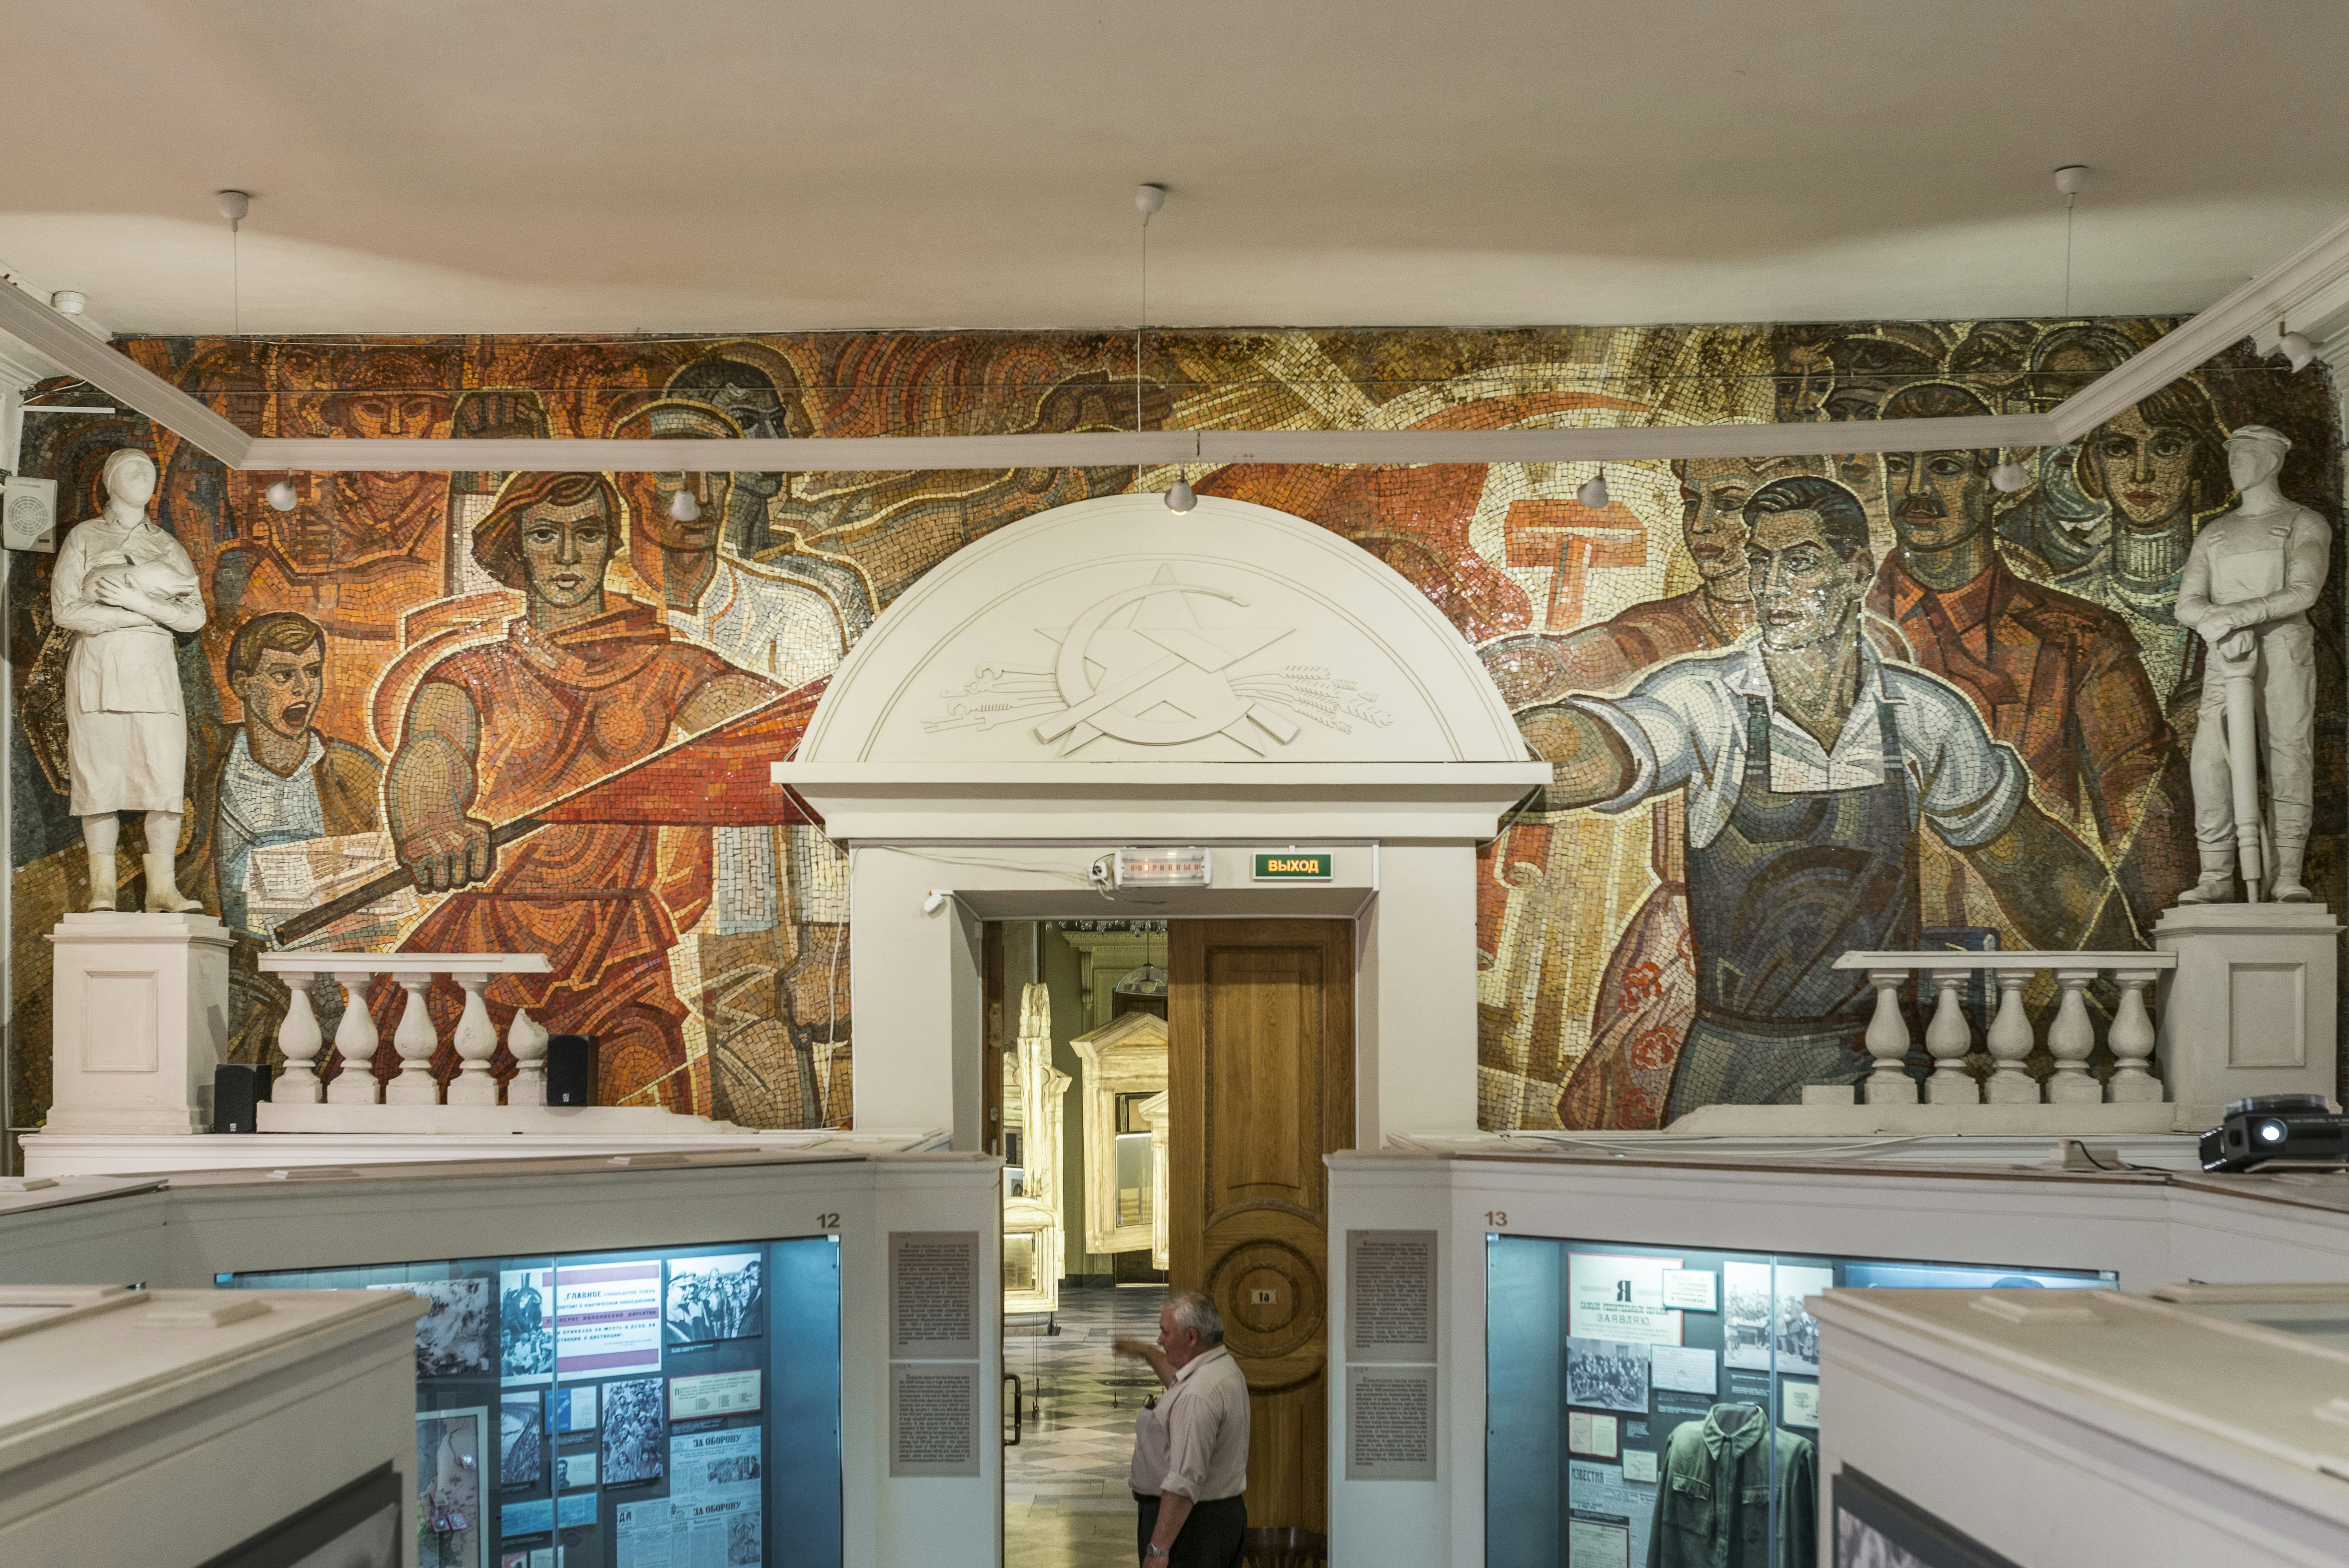 A large mosaic of reds and browns depicting many different people covers a wall. The doorway in the middle of the mosaic has a hammer and sickle emblem above it. Museum displays can be seen below.